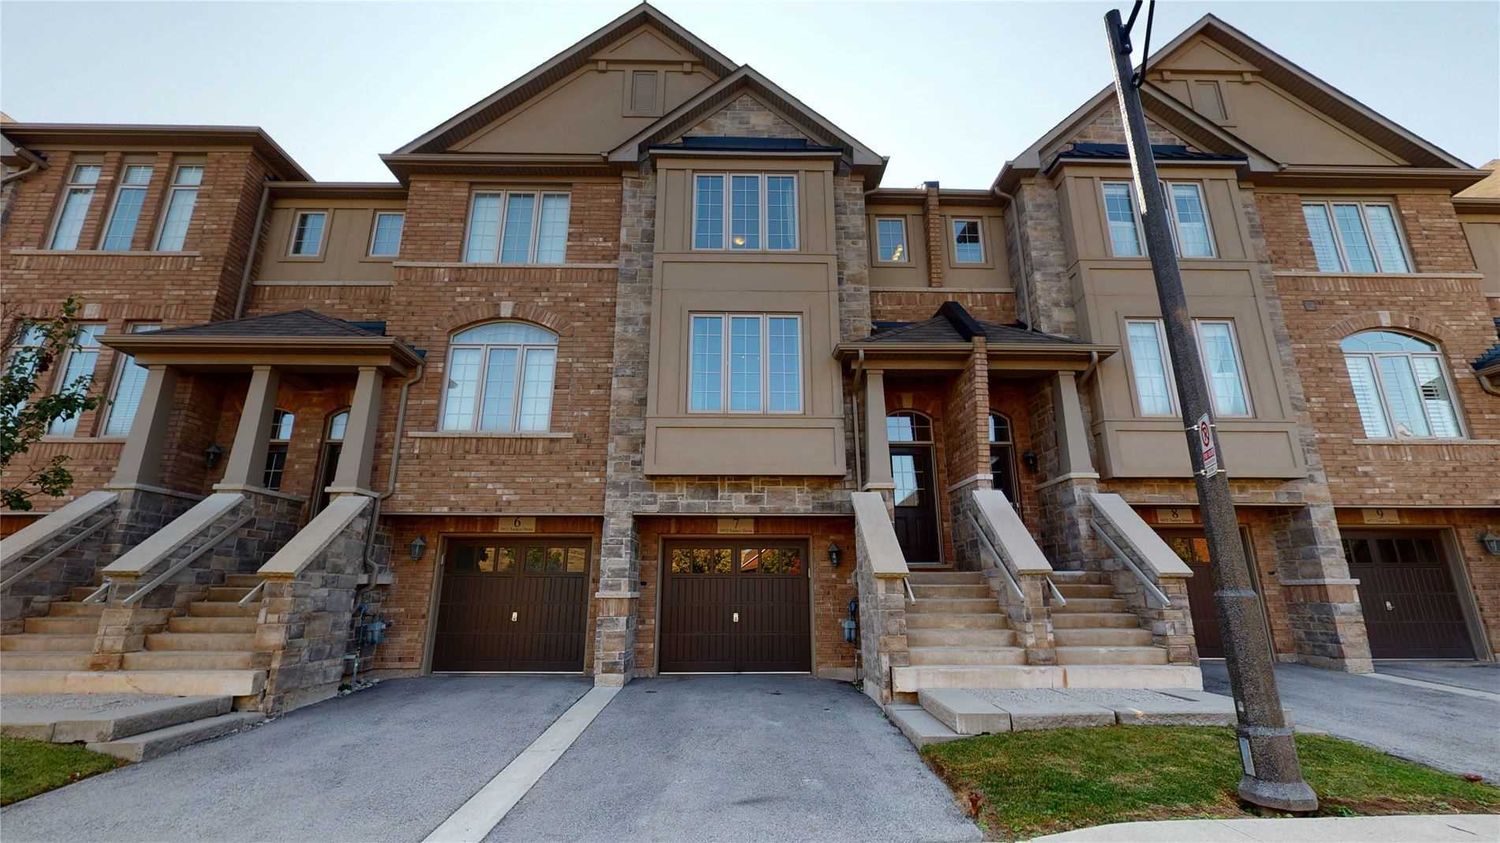 5970-5992 Turney Drive. 5988 Turney Dr Townhomes is located in  Mississauga, Toronto - image #2 of 2